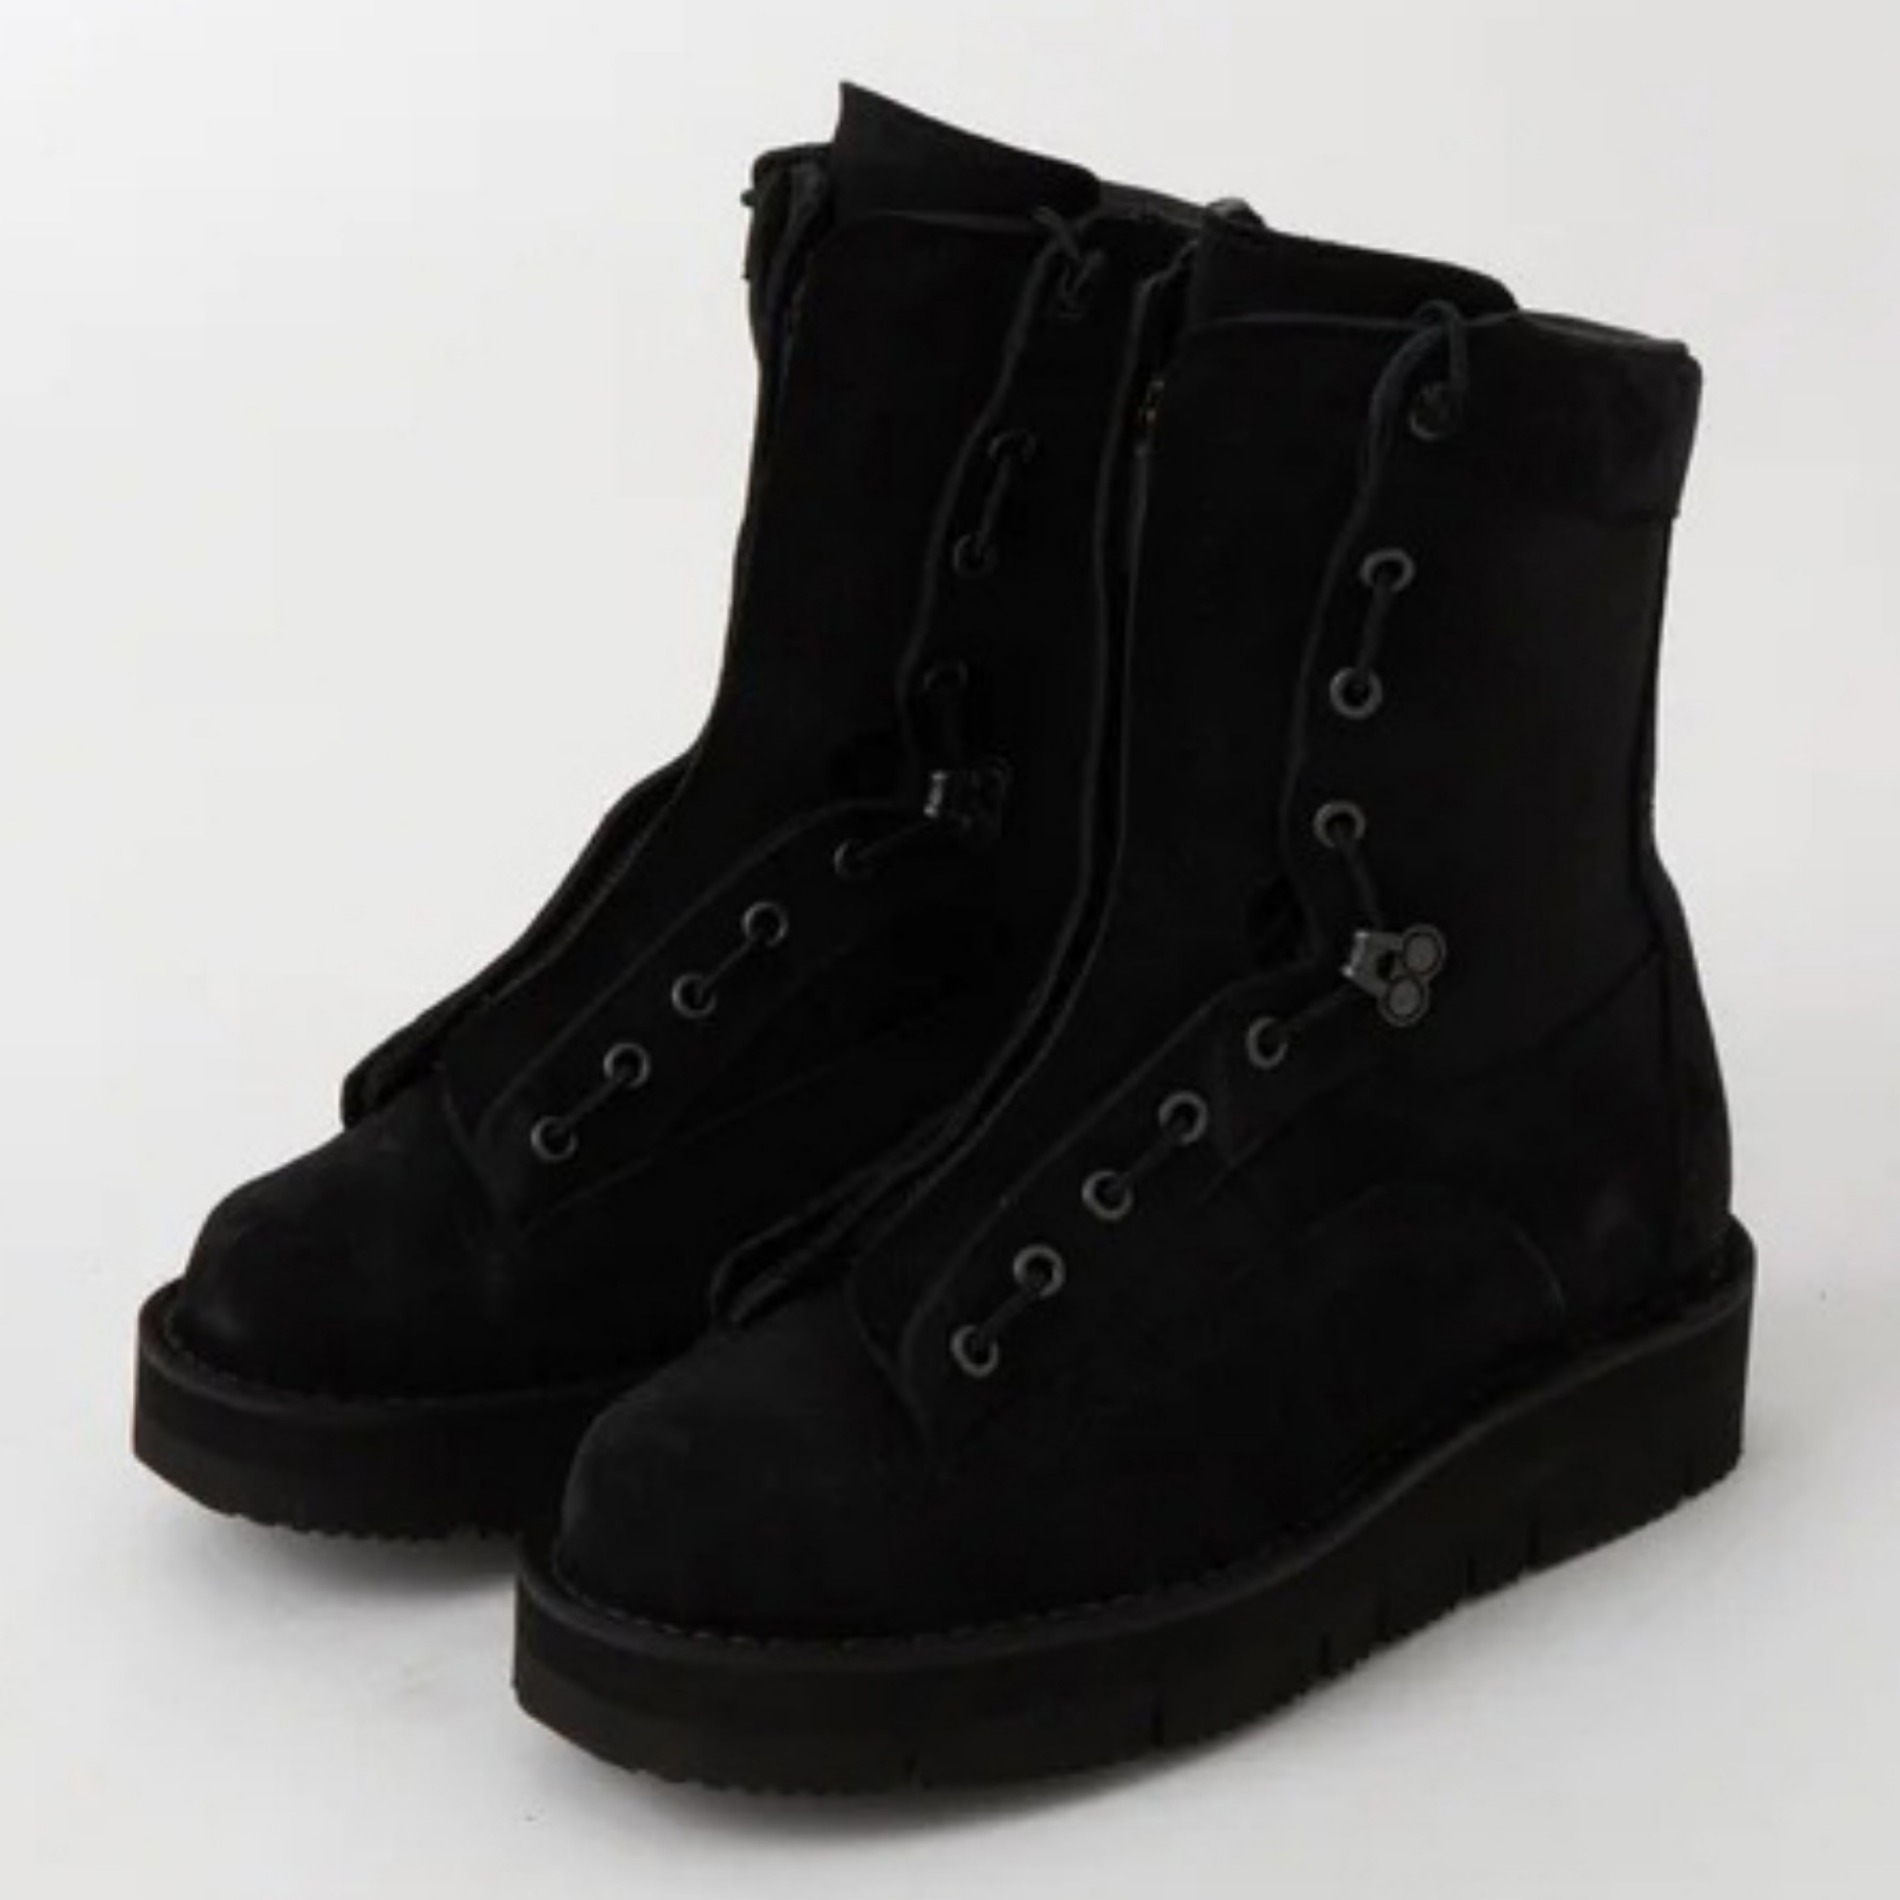 WHITE MOUNTAINEERING X DANNER COMBAT BOOTS BLACK